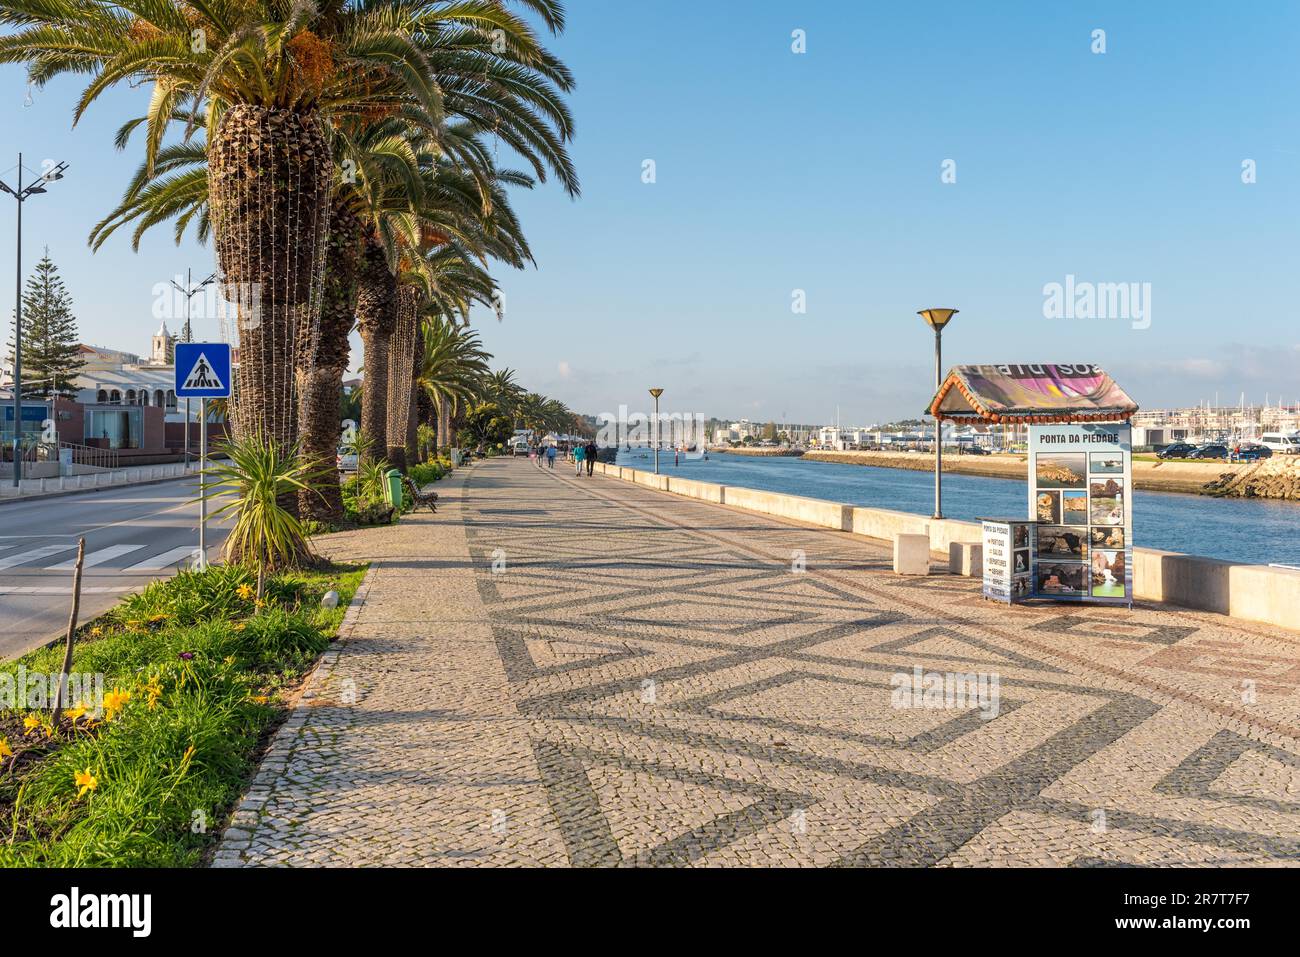 The river promenade in Lagos. Stroll along the Bensafrim river to the marina of the town Stock Photo